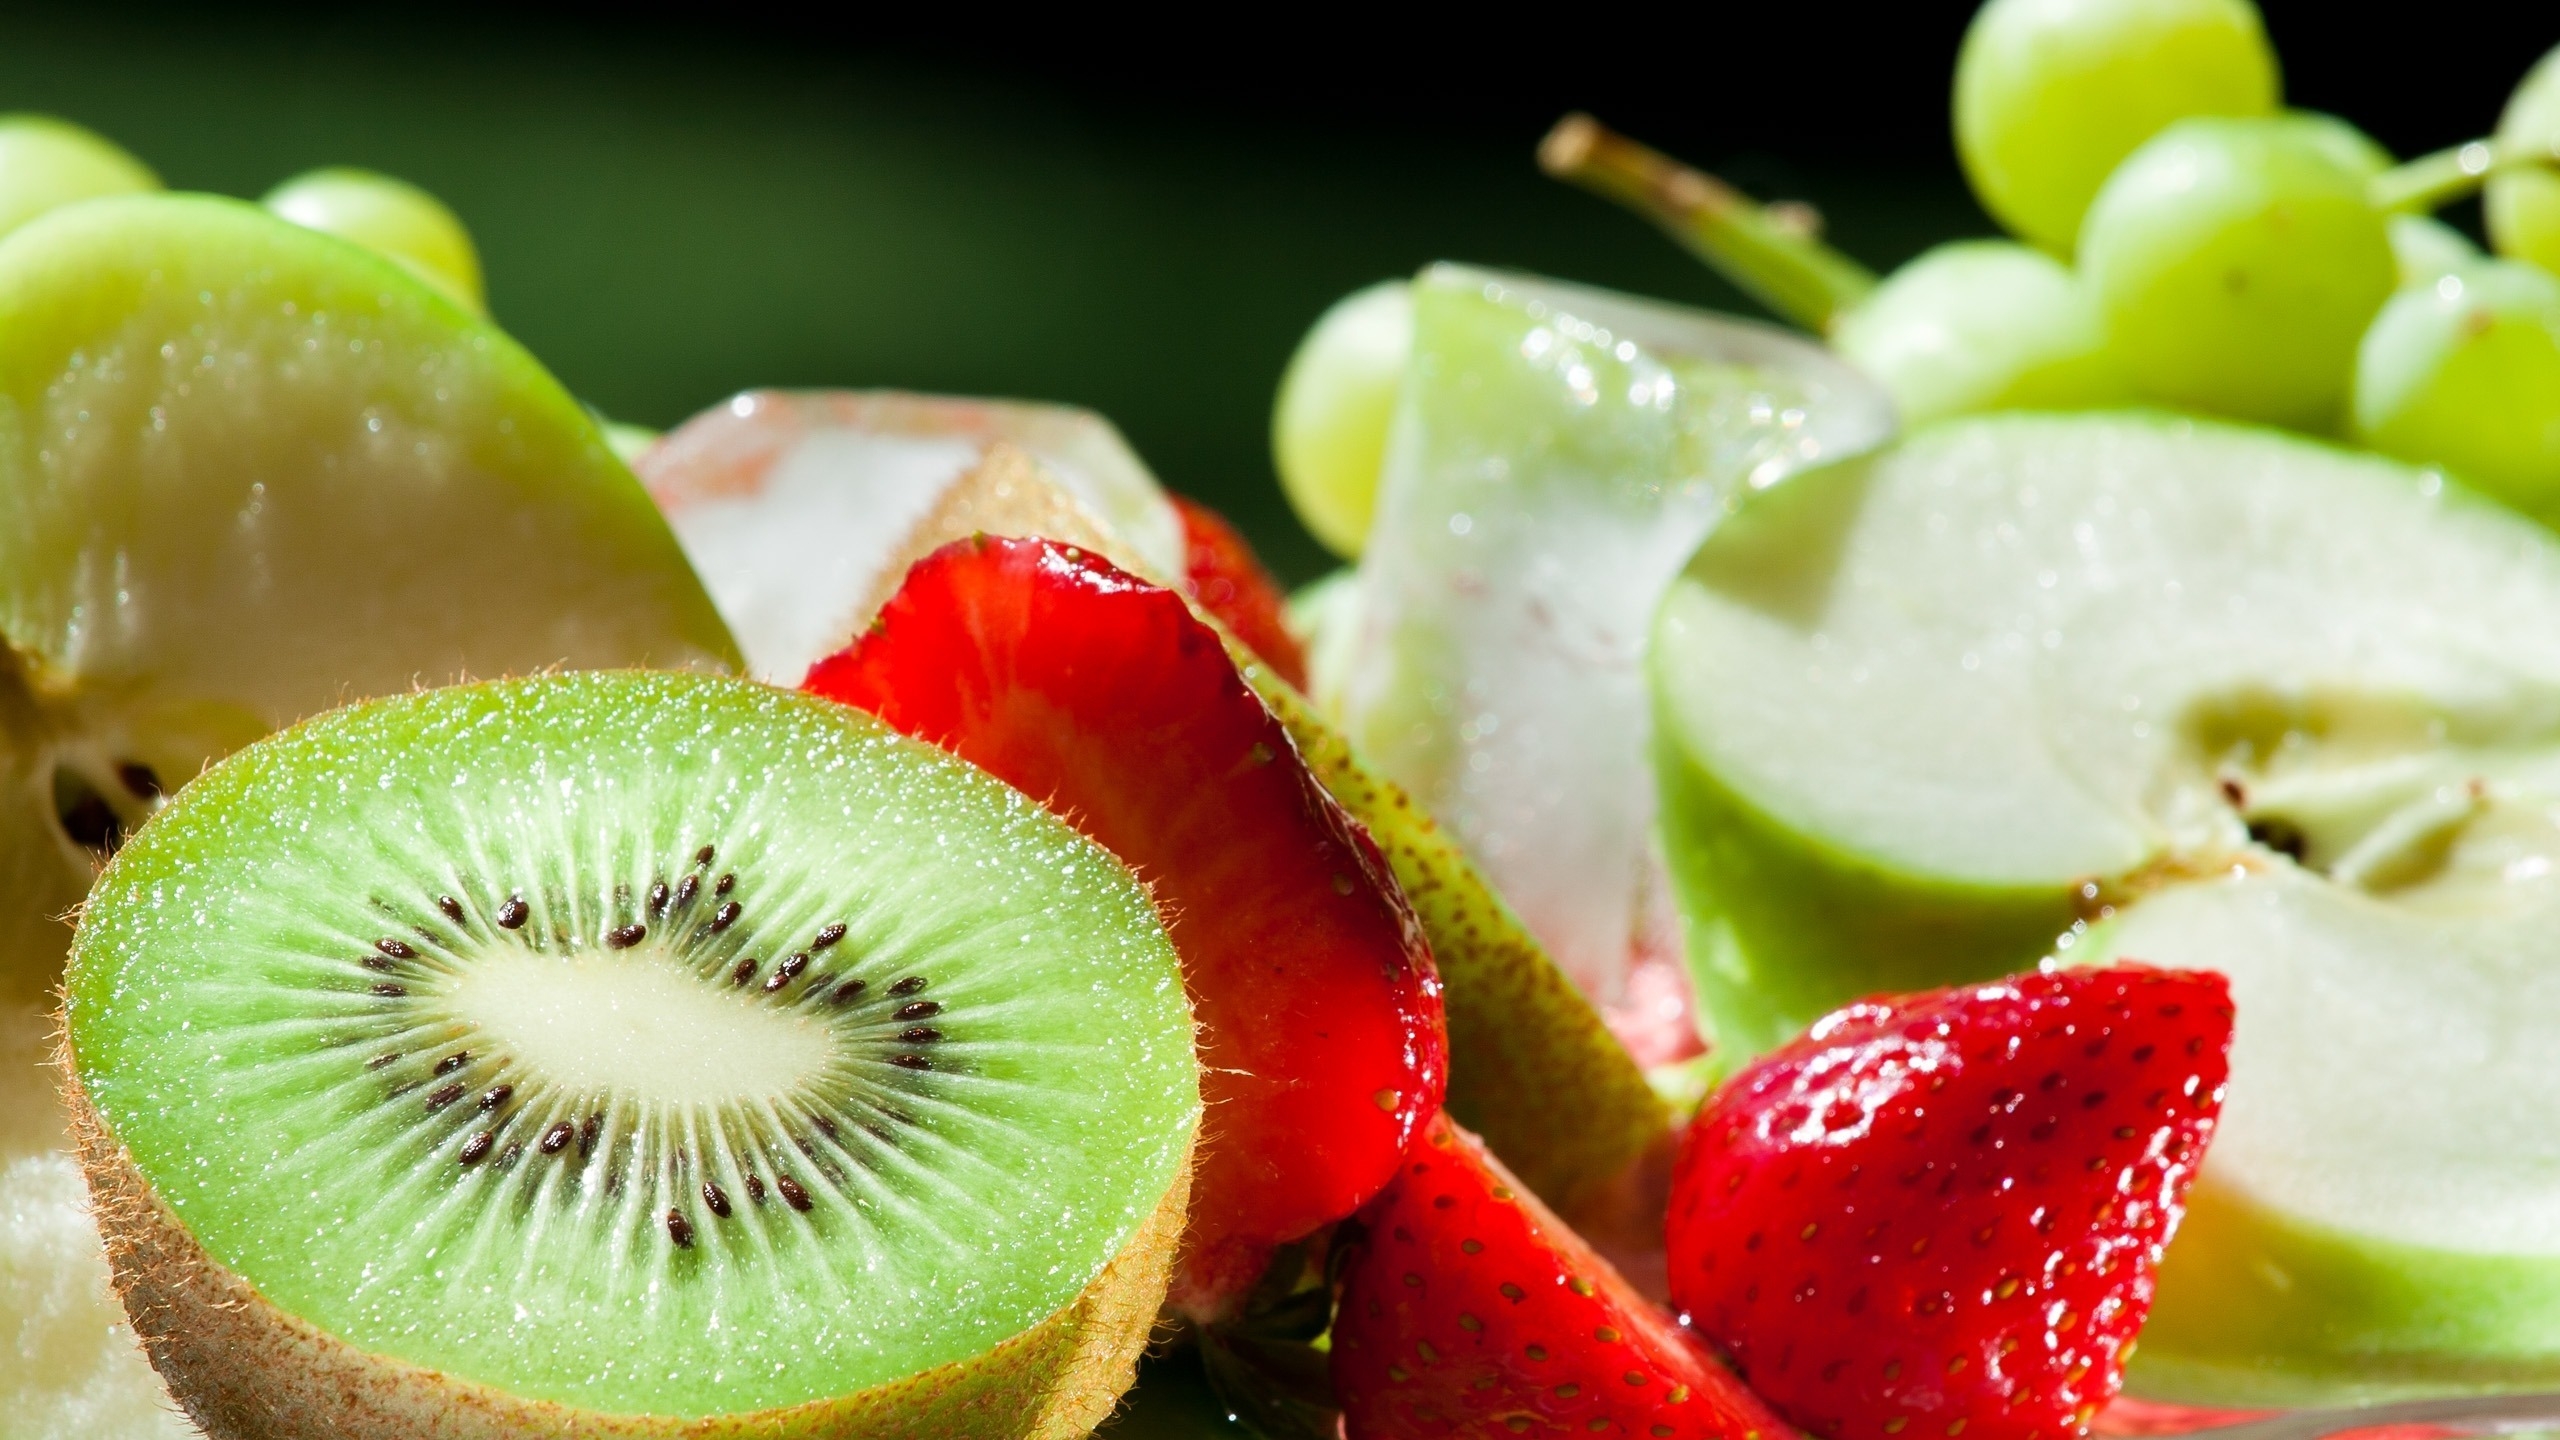 Only Fresh Fruits for 2560x1440 HDTV resolution